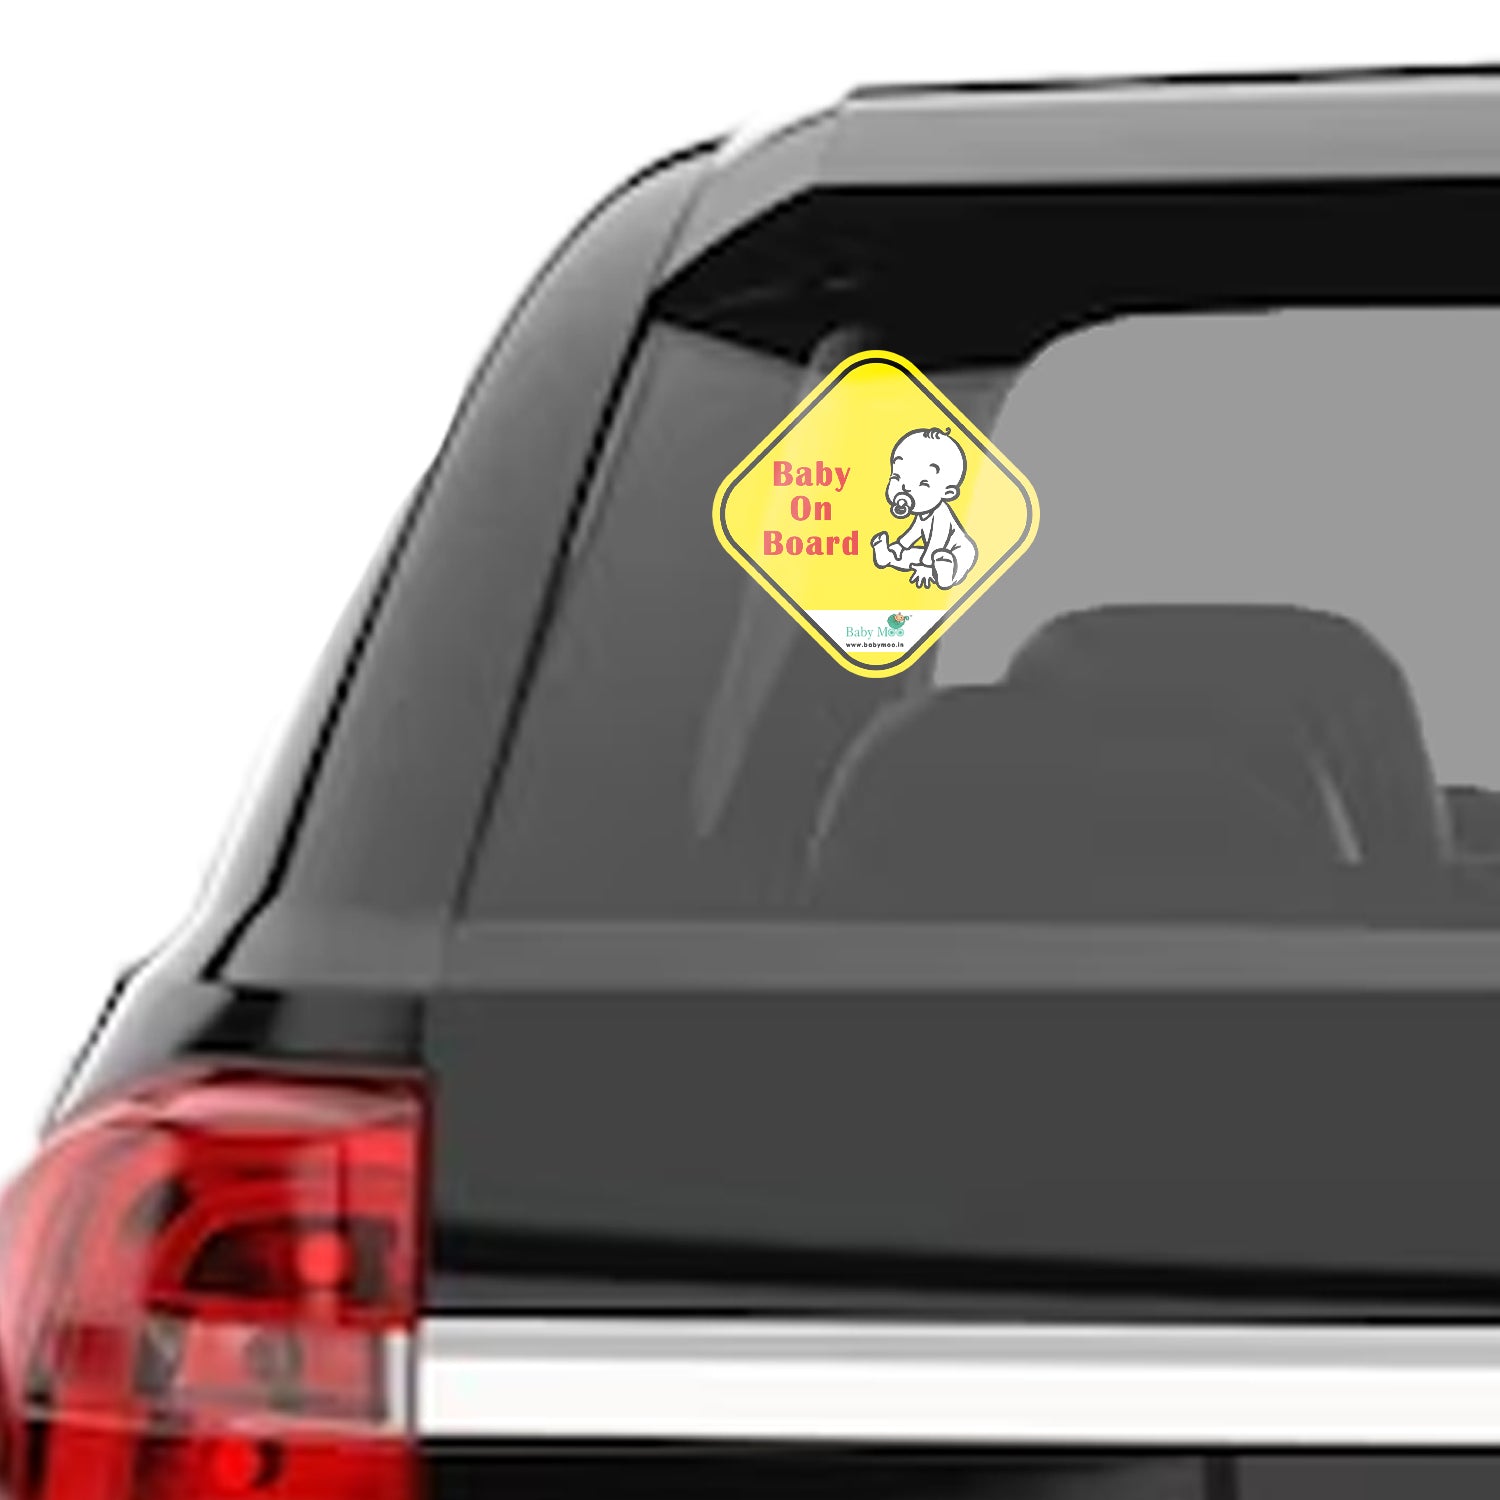 Baby Moo Tiny Baby On Board Car Safety Sign With Suction Cup Clip 2 Pack - Yellow - Baby Moo